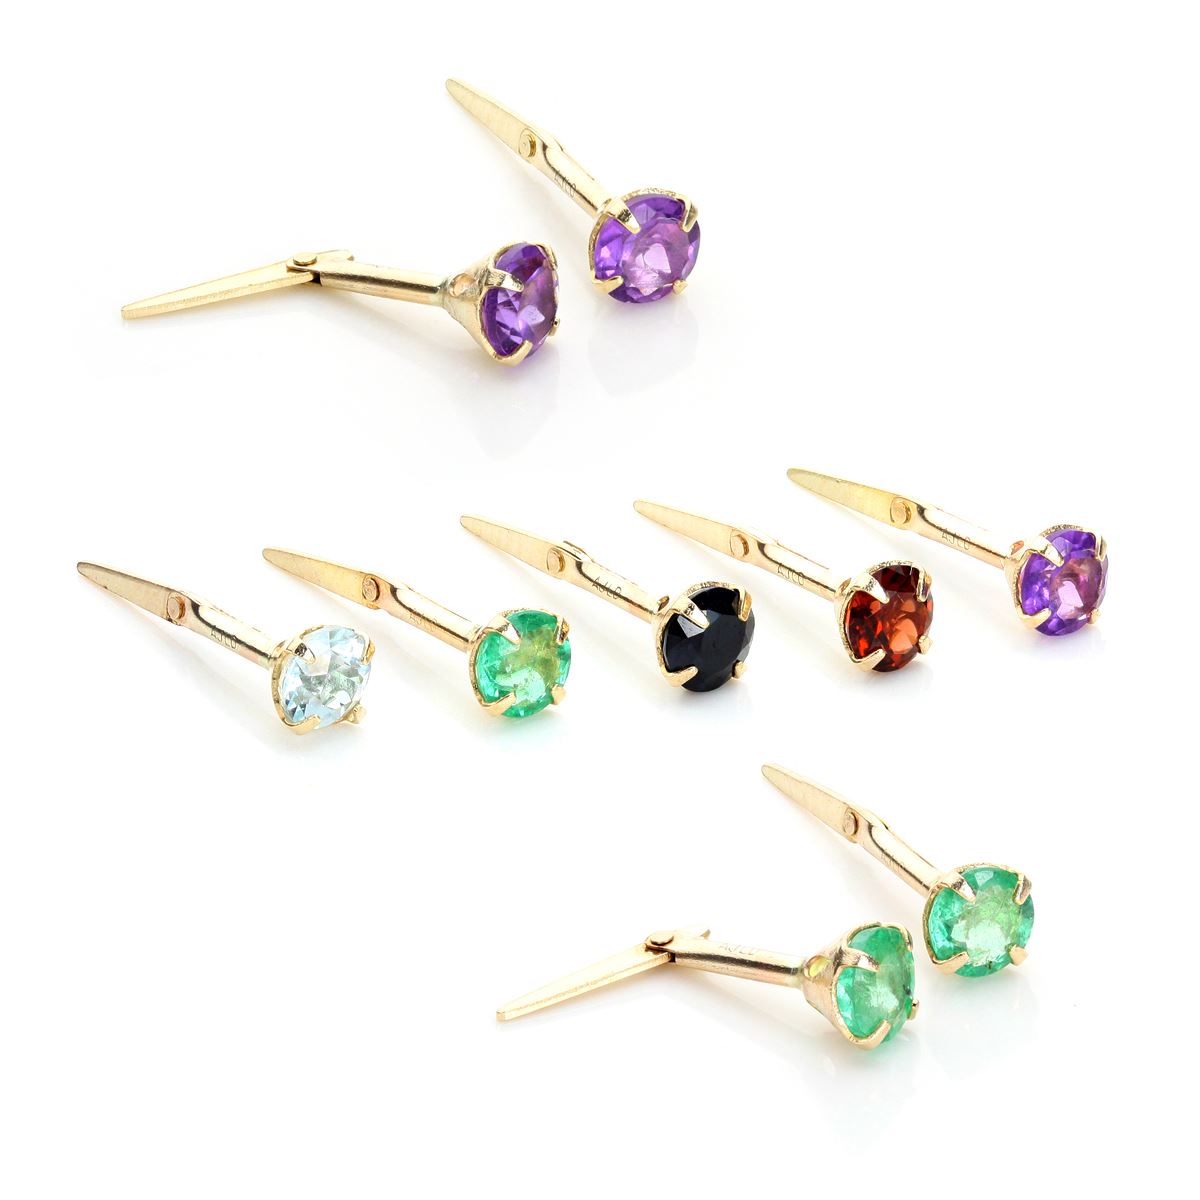 Andralok 9ct Yellow Gold Gemstone 3.5mm Round Stud Earrings